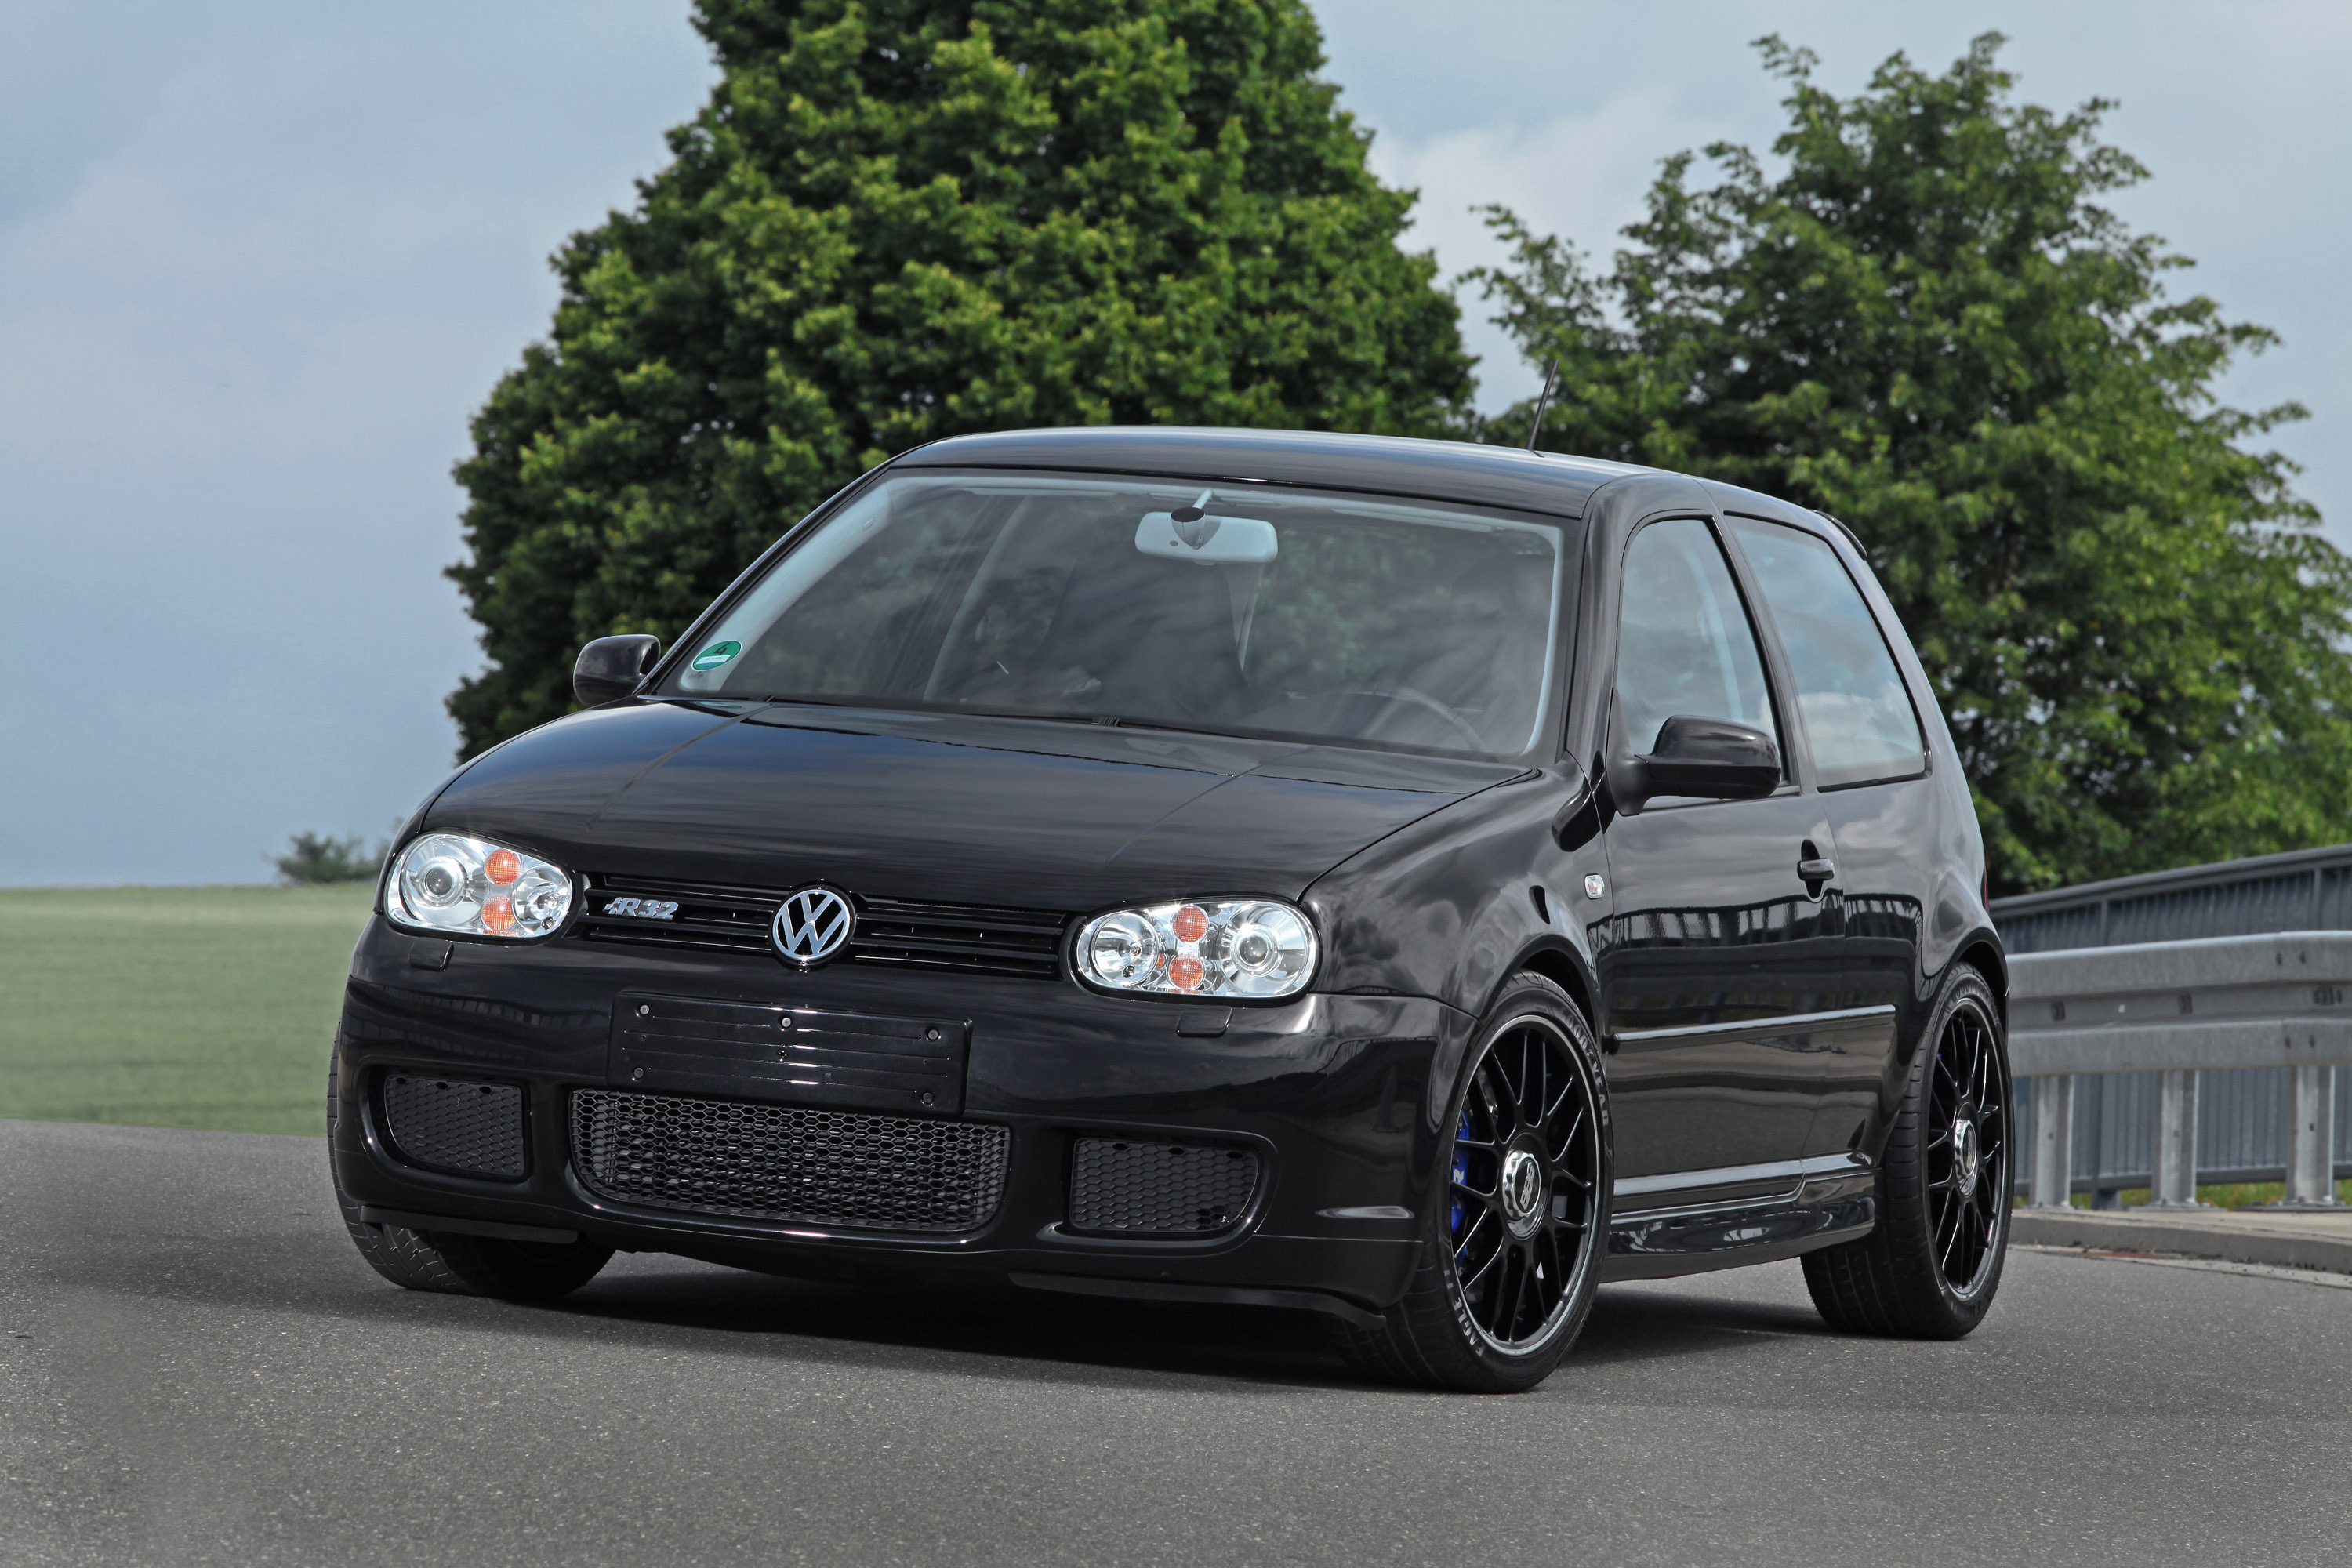 HPerformance Volkswagen Golf IV with 650hp in R32